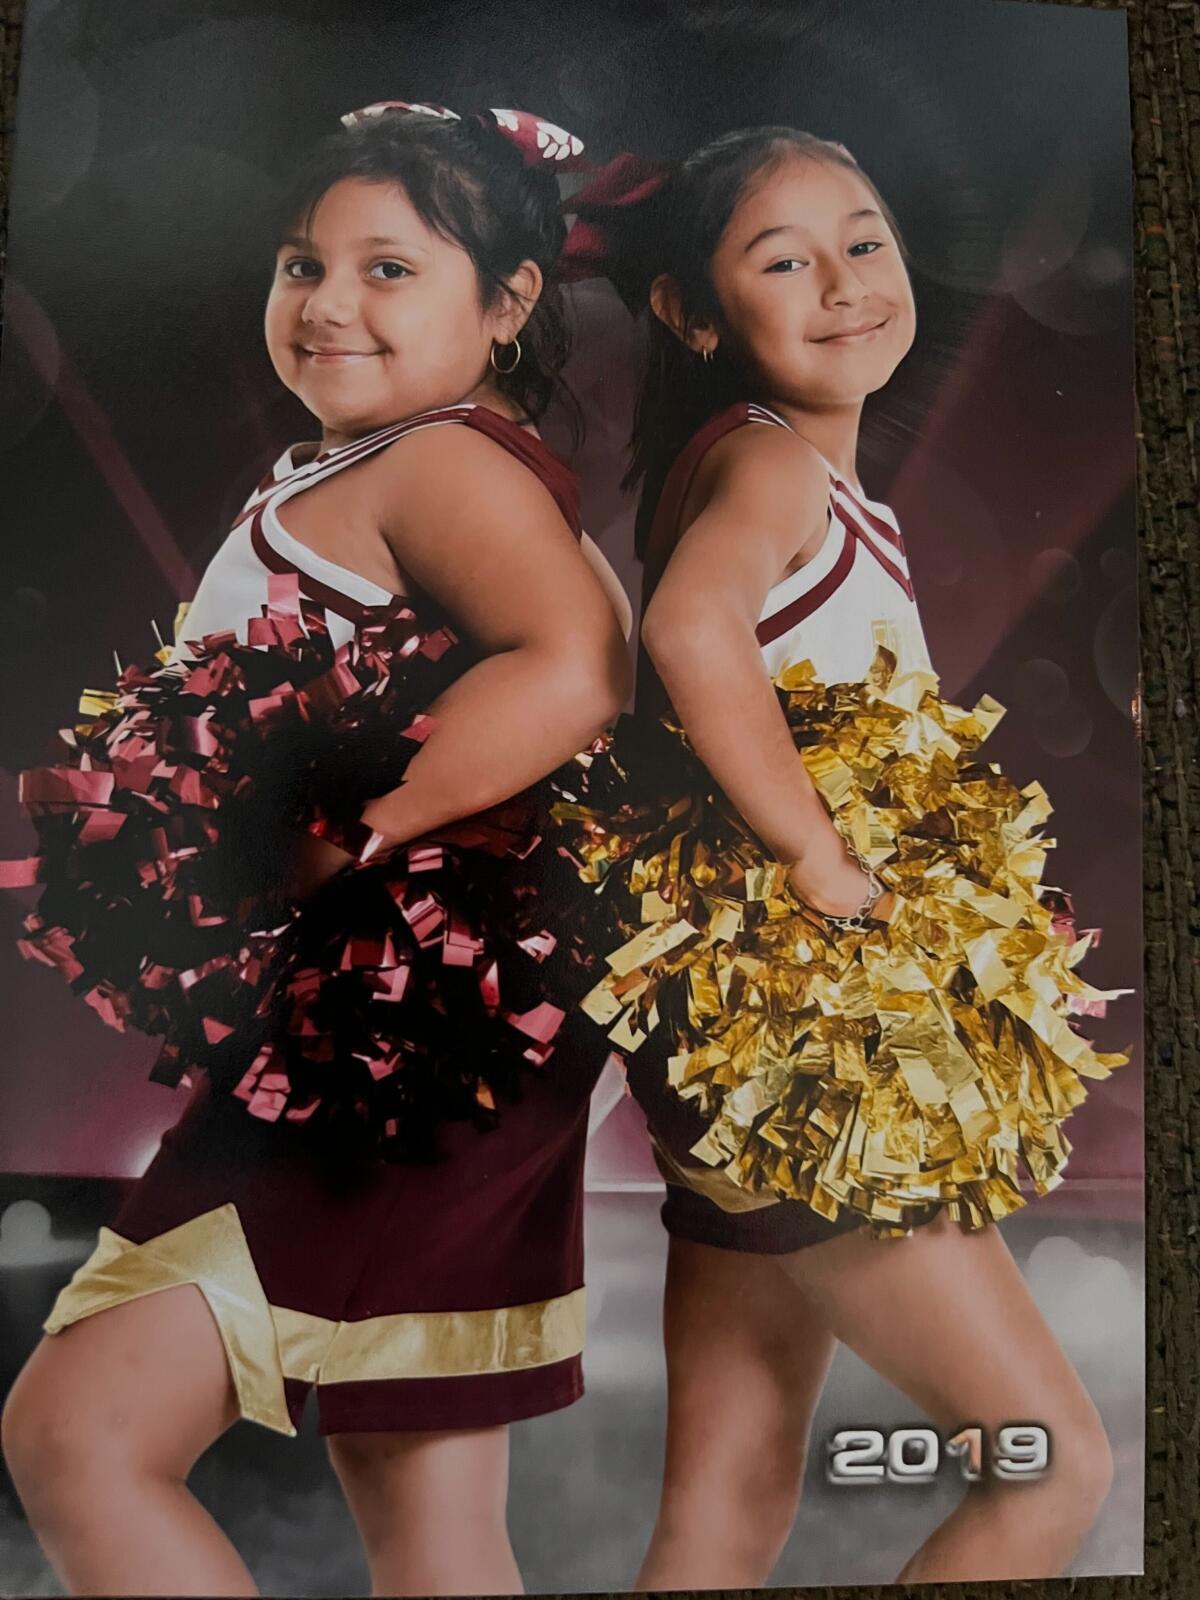 Two little girls in cheerleading uniforms holding pompoms and standing back-to-back